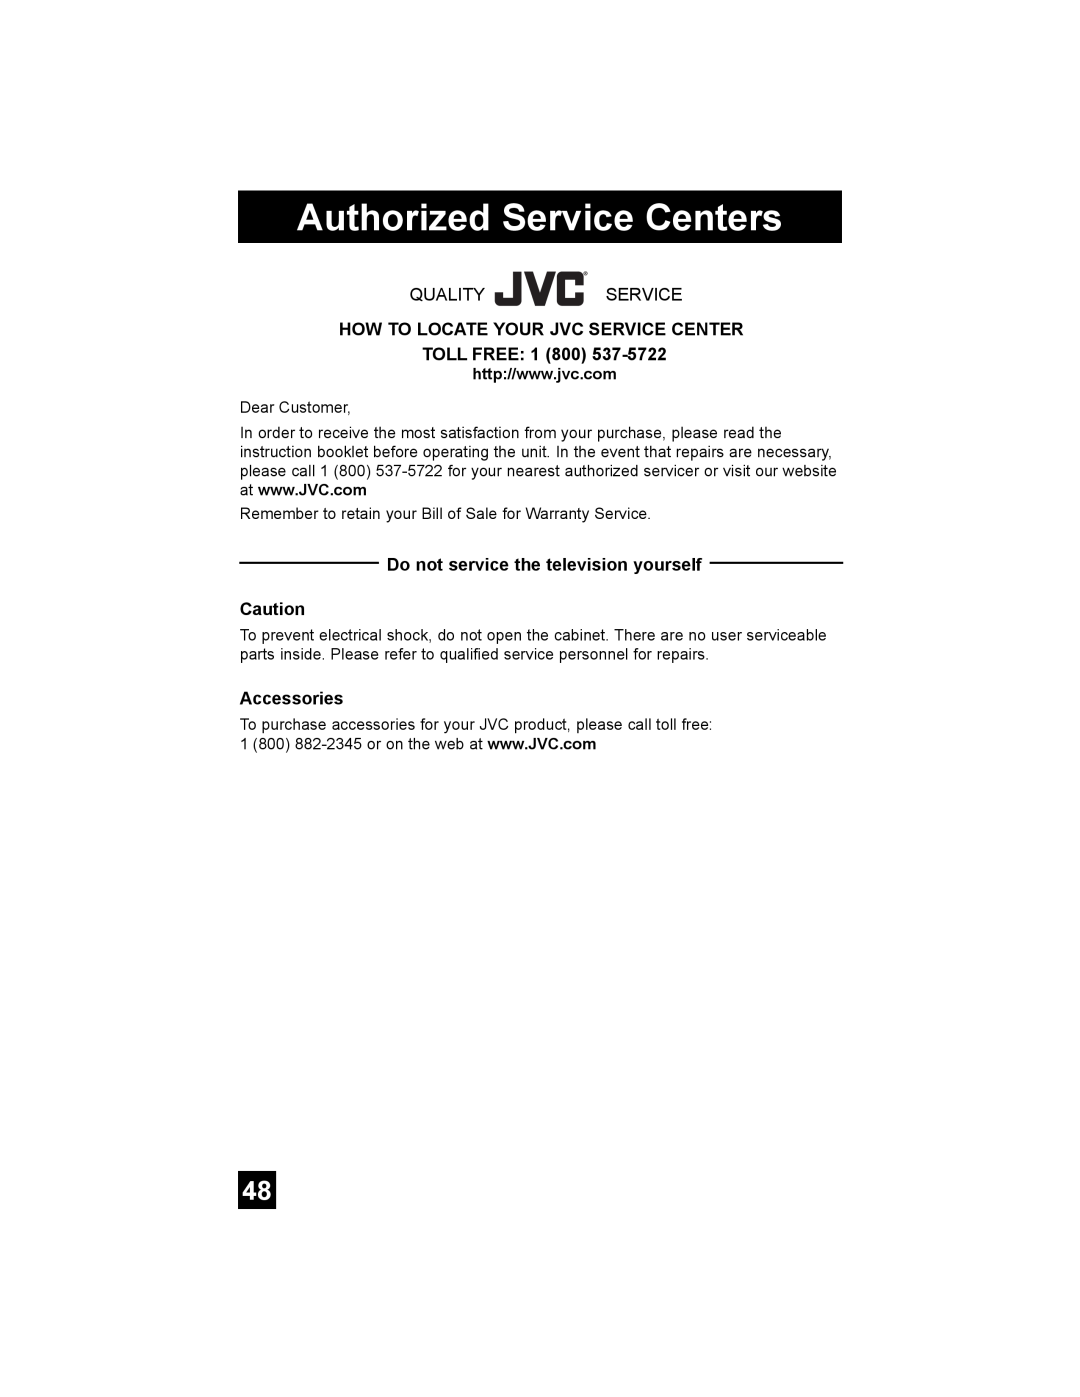 JVC AV 20FA44 manual Authorized Service Centers, Quality Service, HOW TO LOCATE YOUR JVC SERVICE CENTER TOLL FREE 1 800 